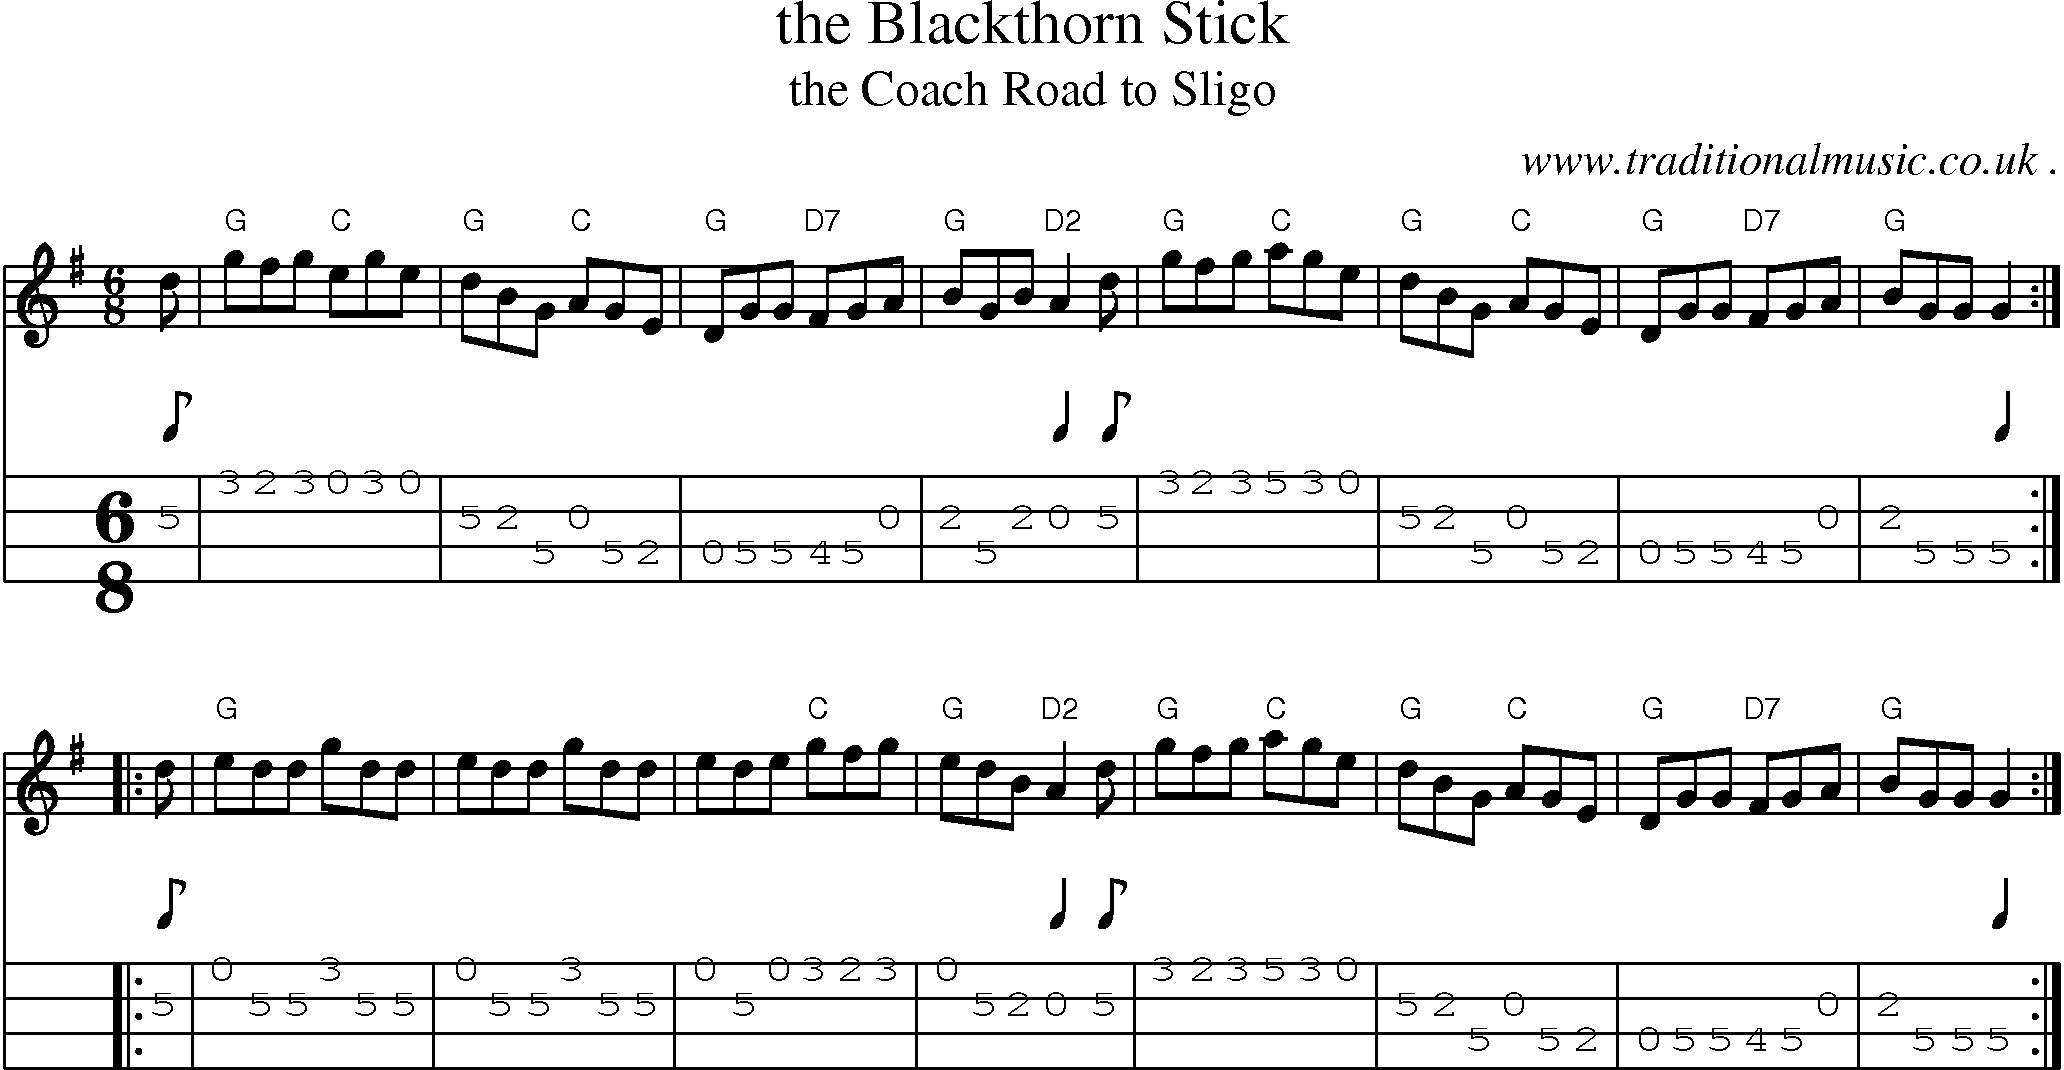 Sheet-music  score, Chords and Mandolin Tabs for The Blackthorn Stick